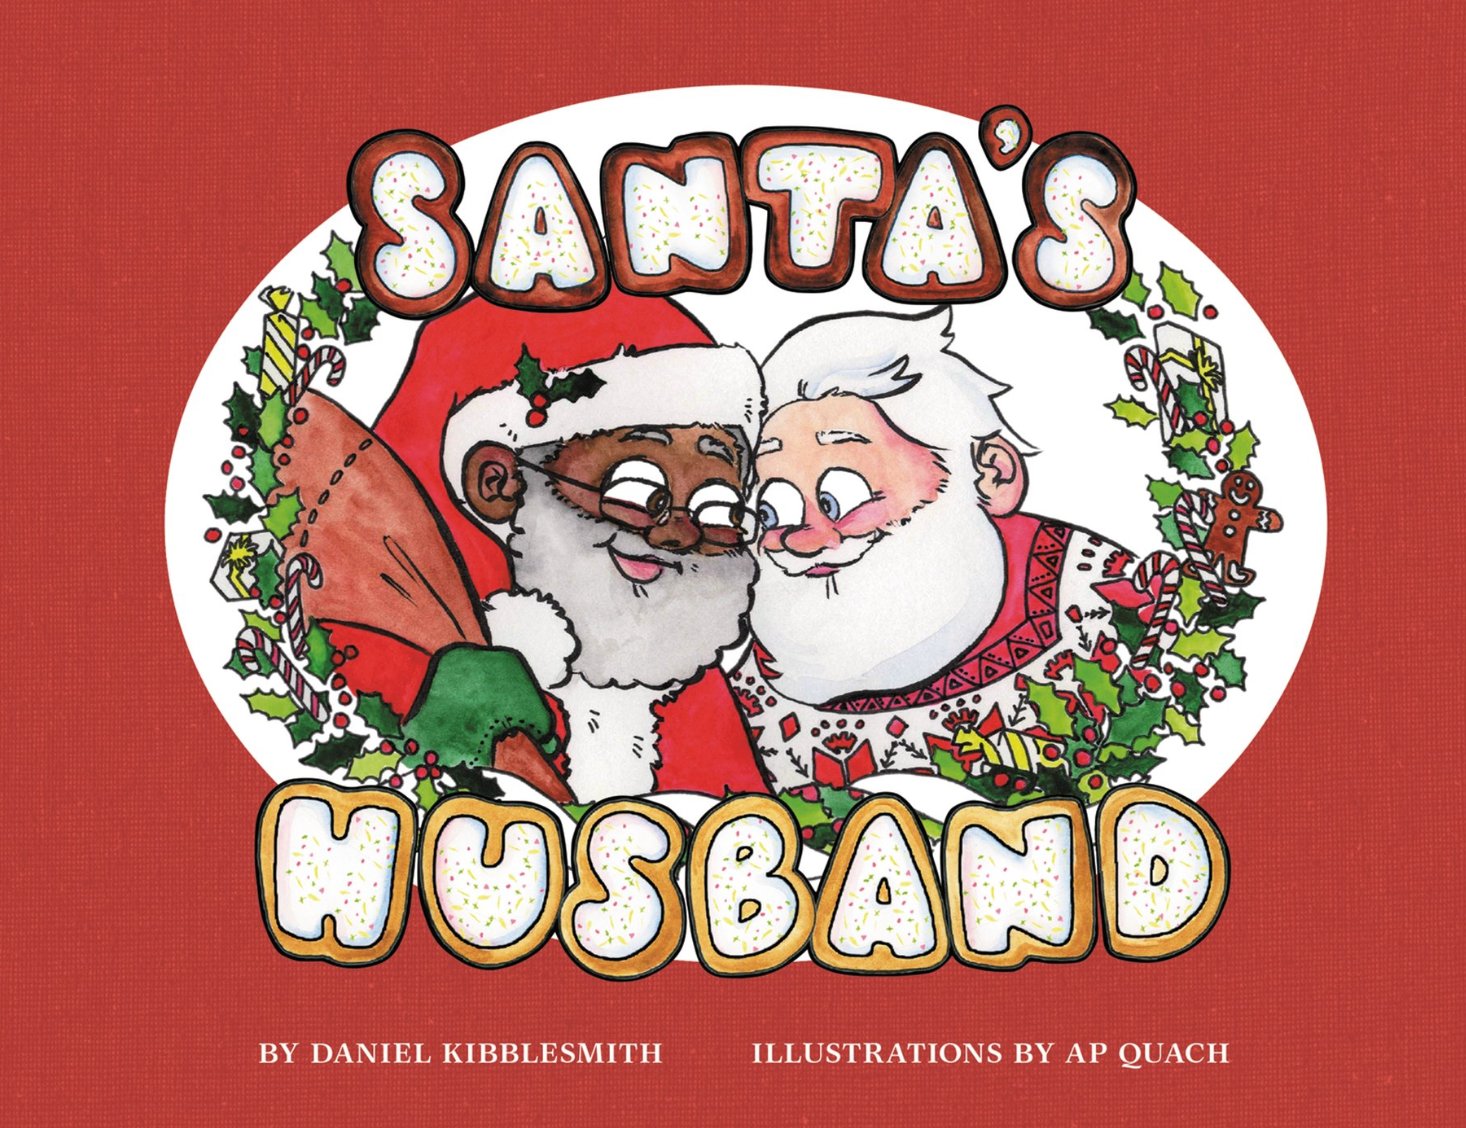 The "Santa's Husband" book is on display at the Ridgeland Library. Amazon says the book offers “a fresh twist on Kris Kringle, a clever yet heartfelt book that tells the story of a black Santa, his white husband, and their life in the North Pole.